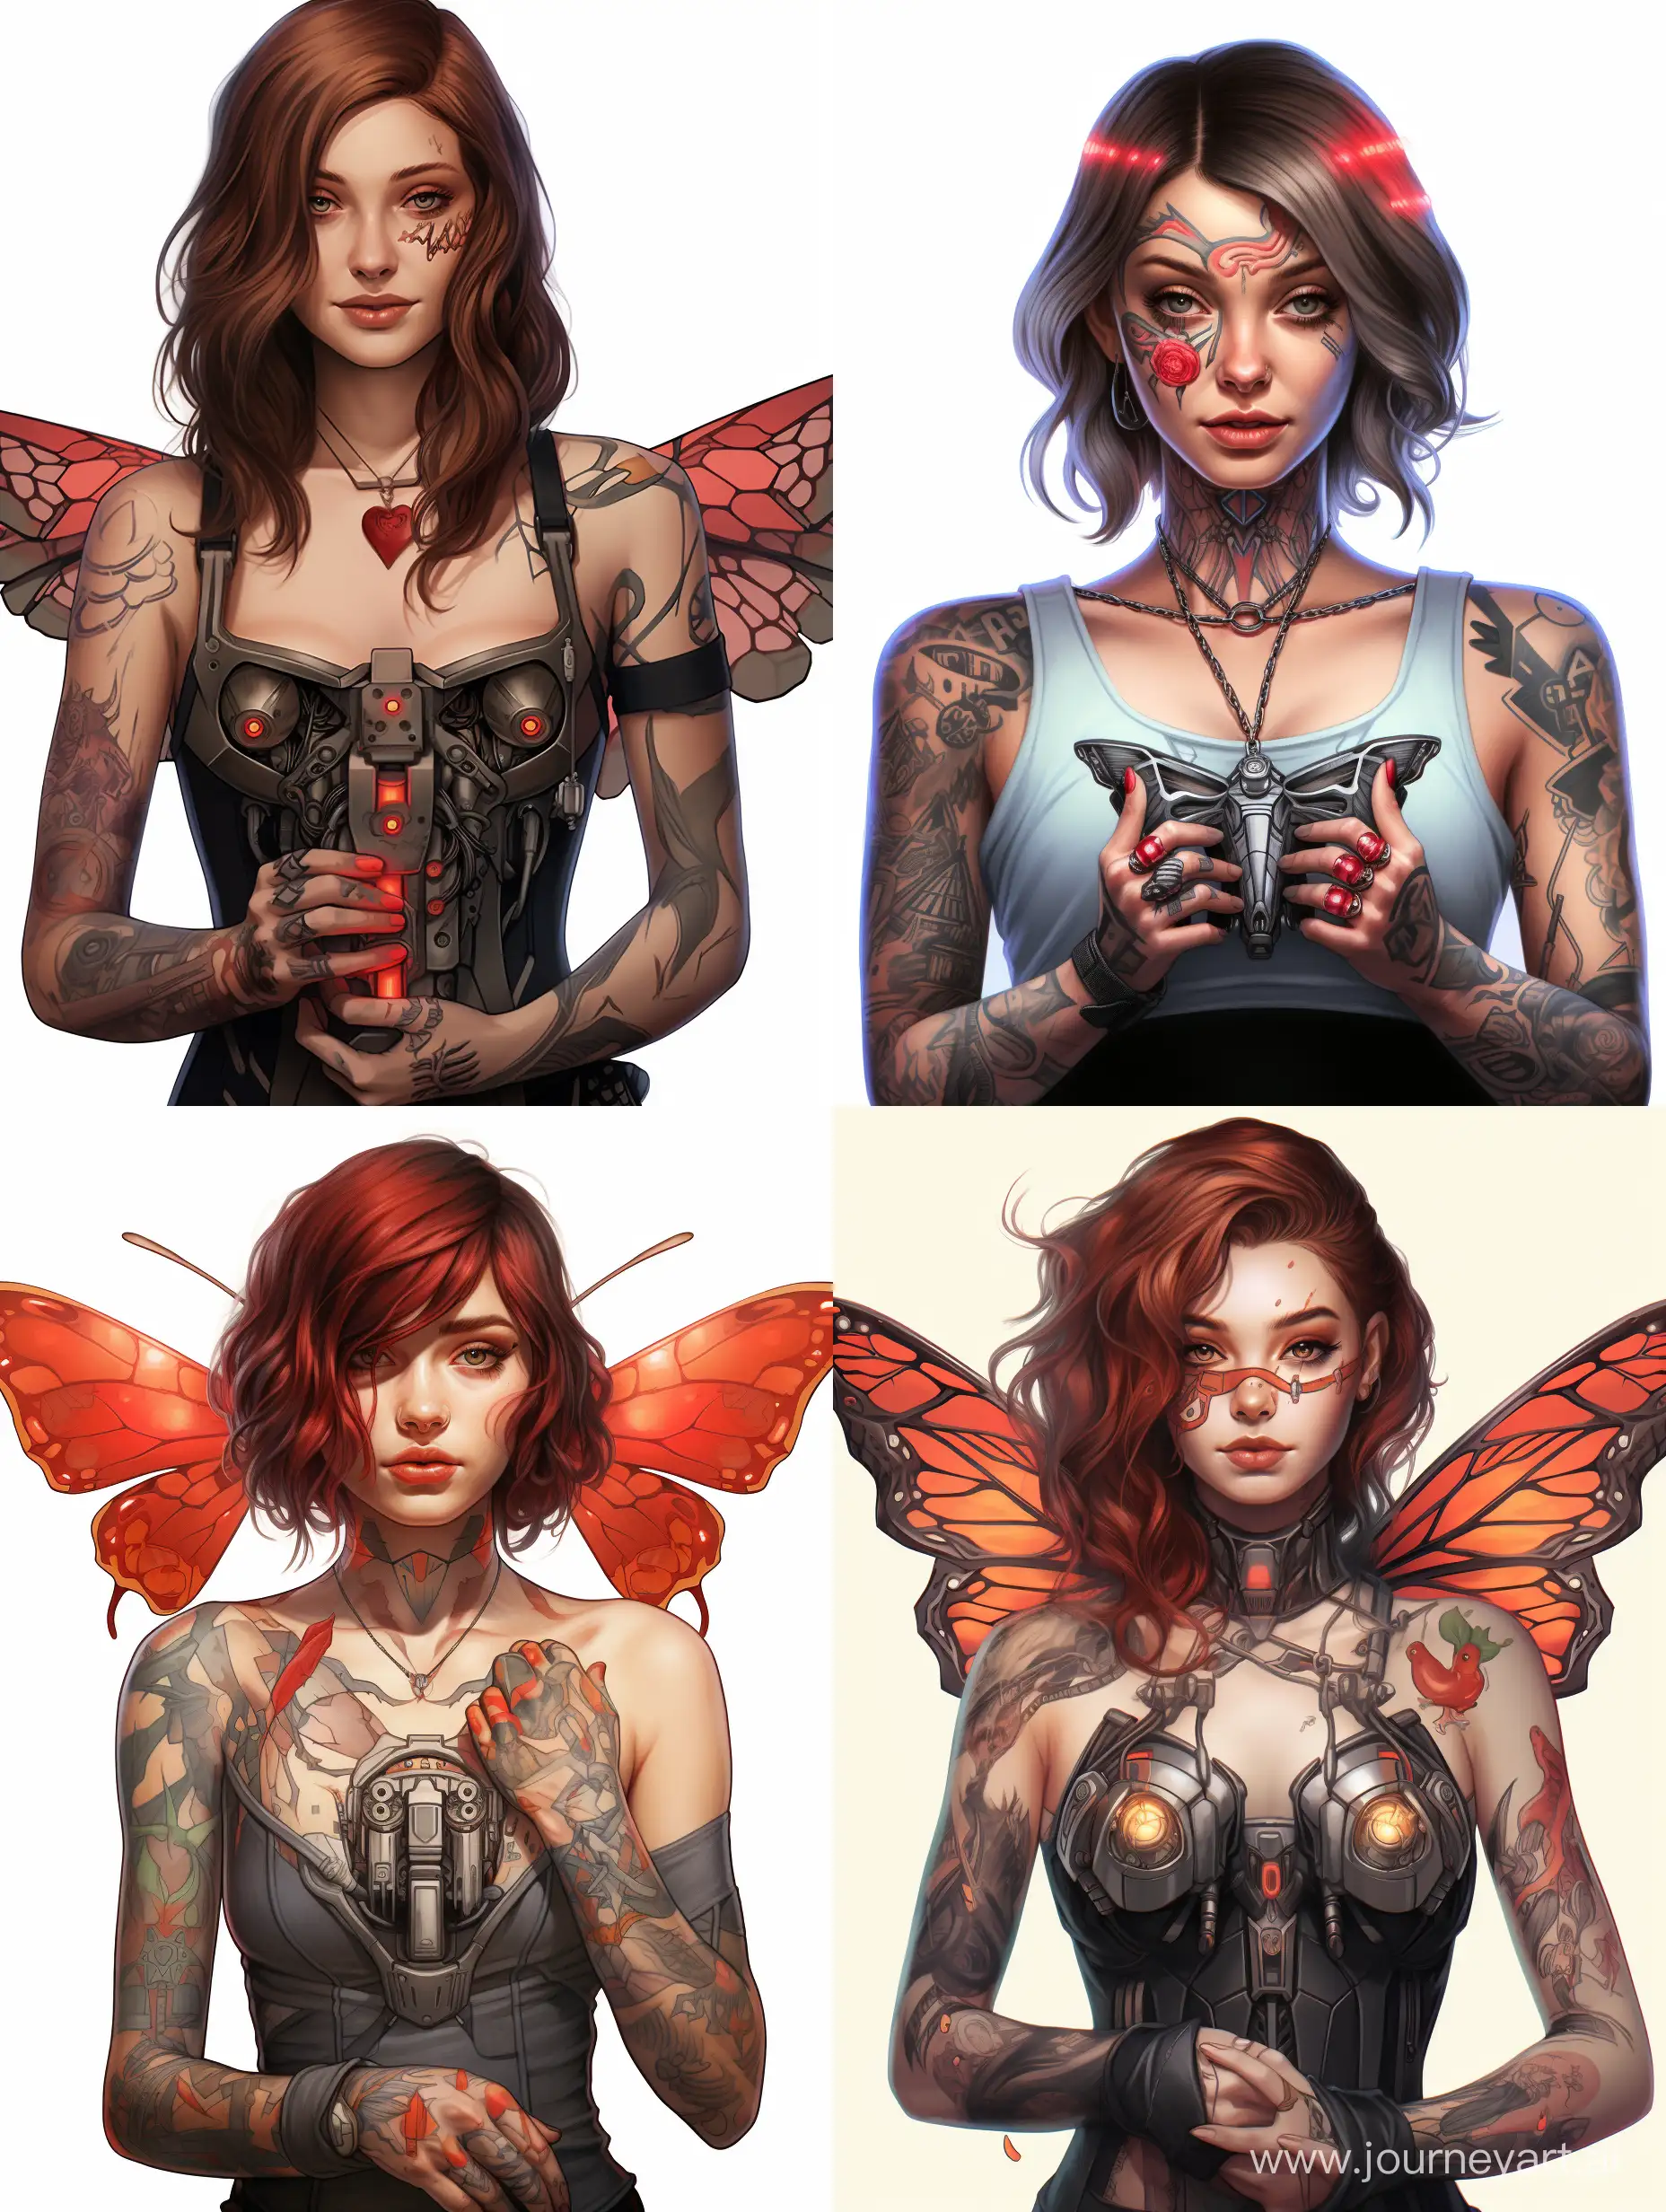 A cute robot girl with a cute face and shoulder-length light brown hair, there is a tattoo of a red moth on her collarbone, realism style, cyberpunk, hands in tattoos, a tattoo machine in her hands
